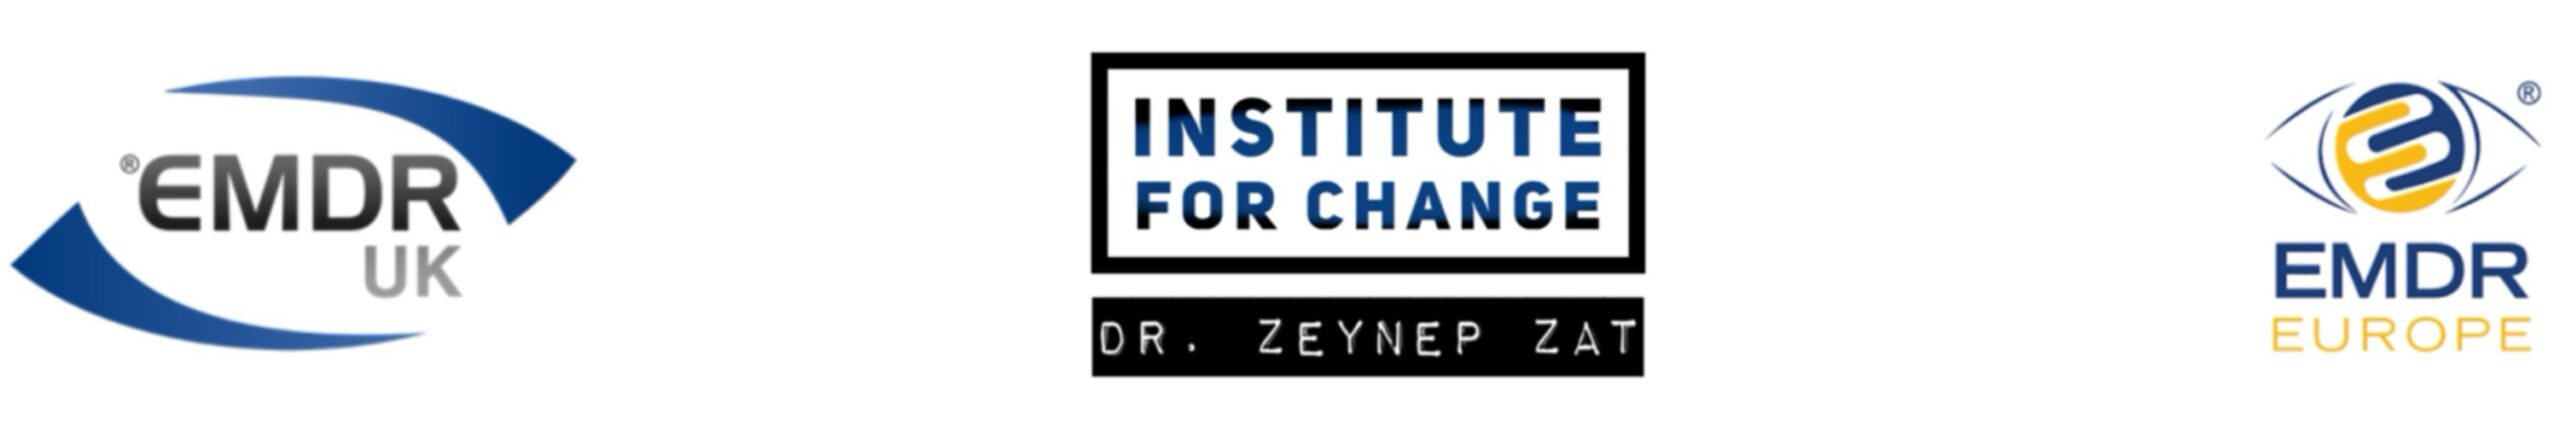 Institute for Change